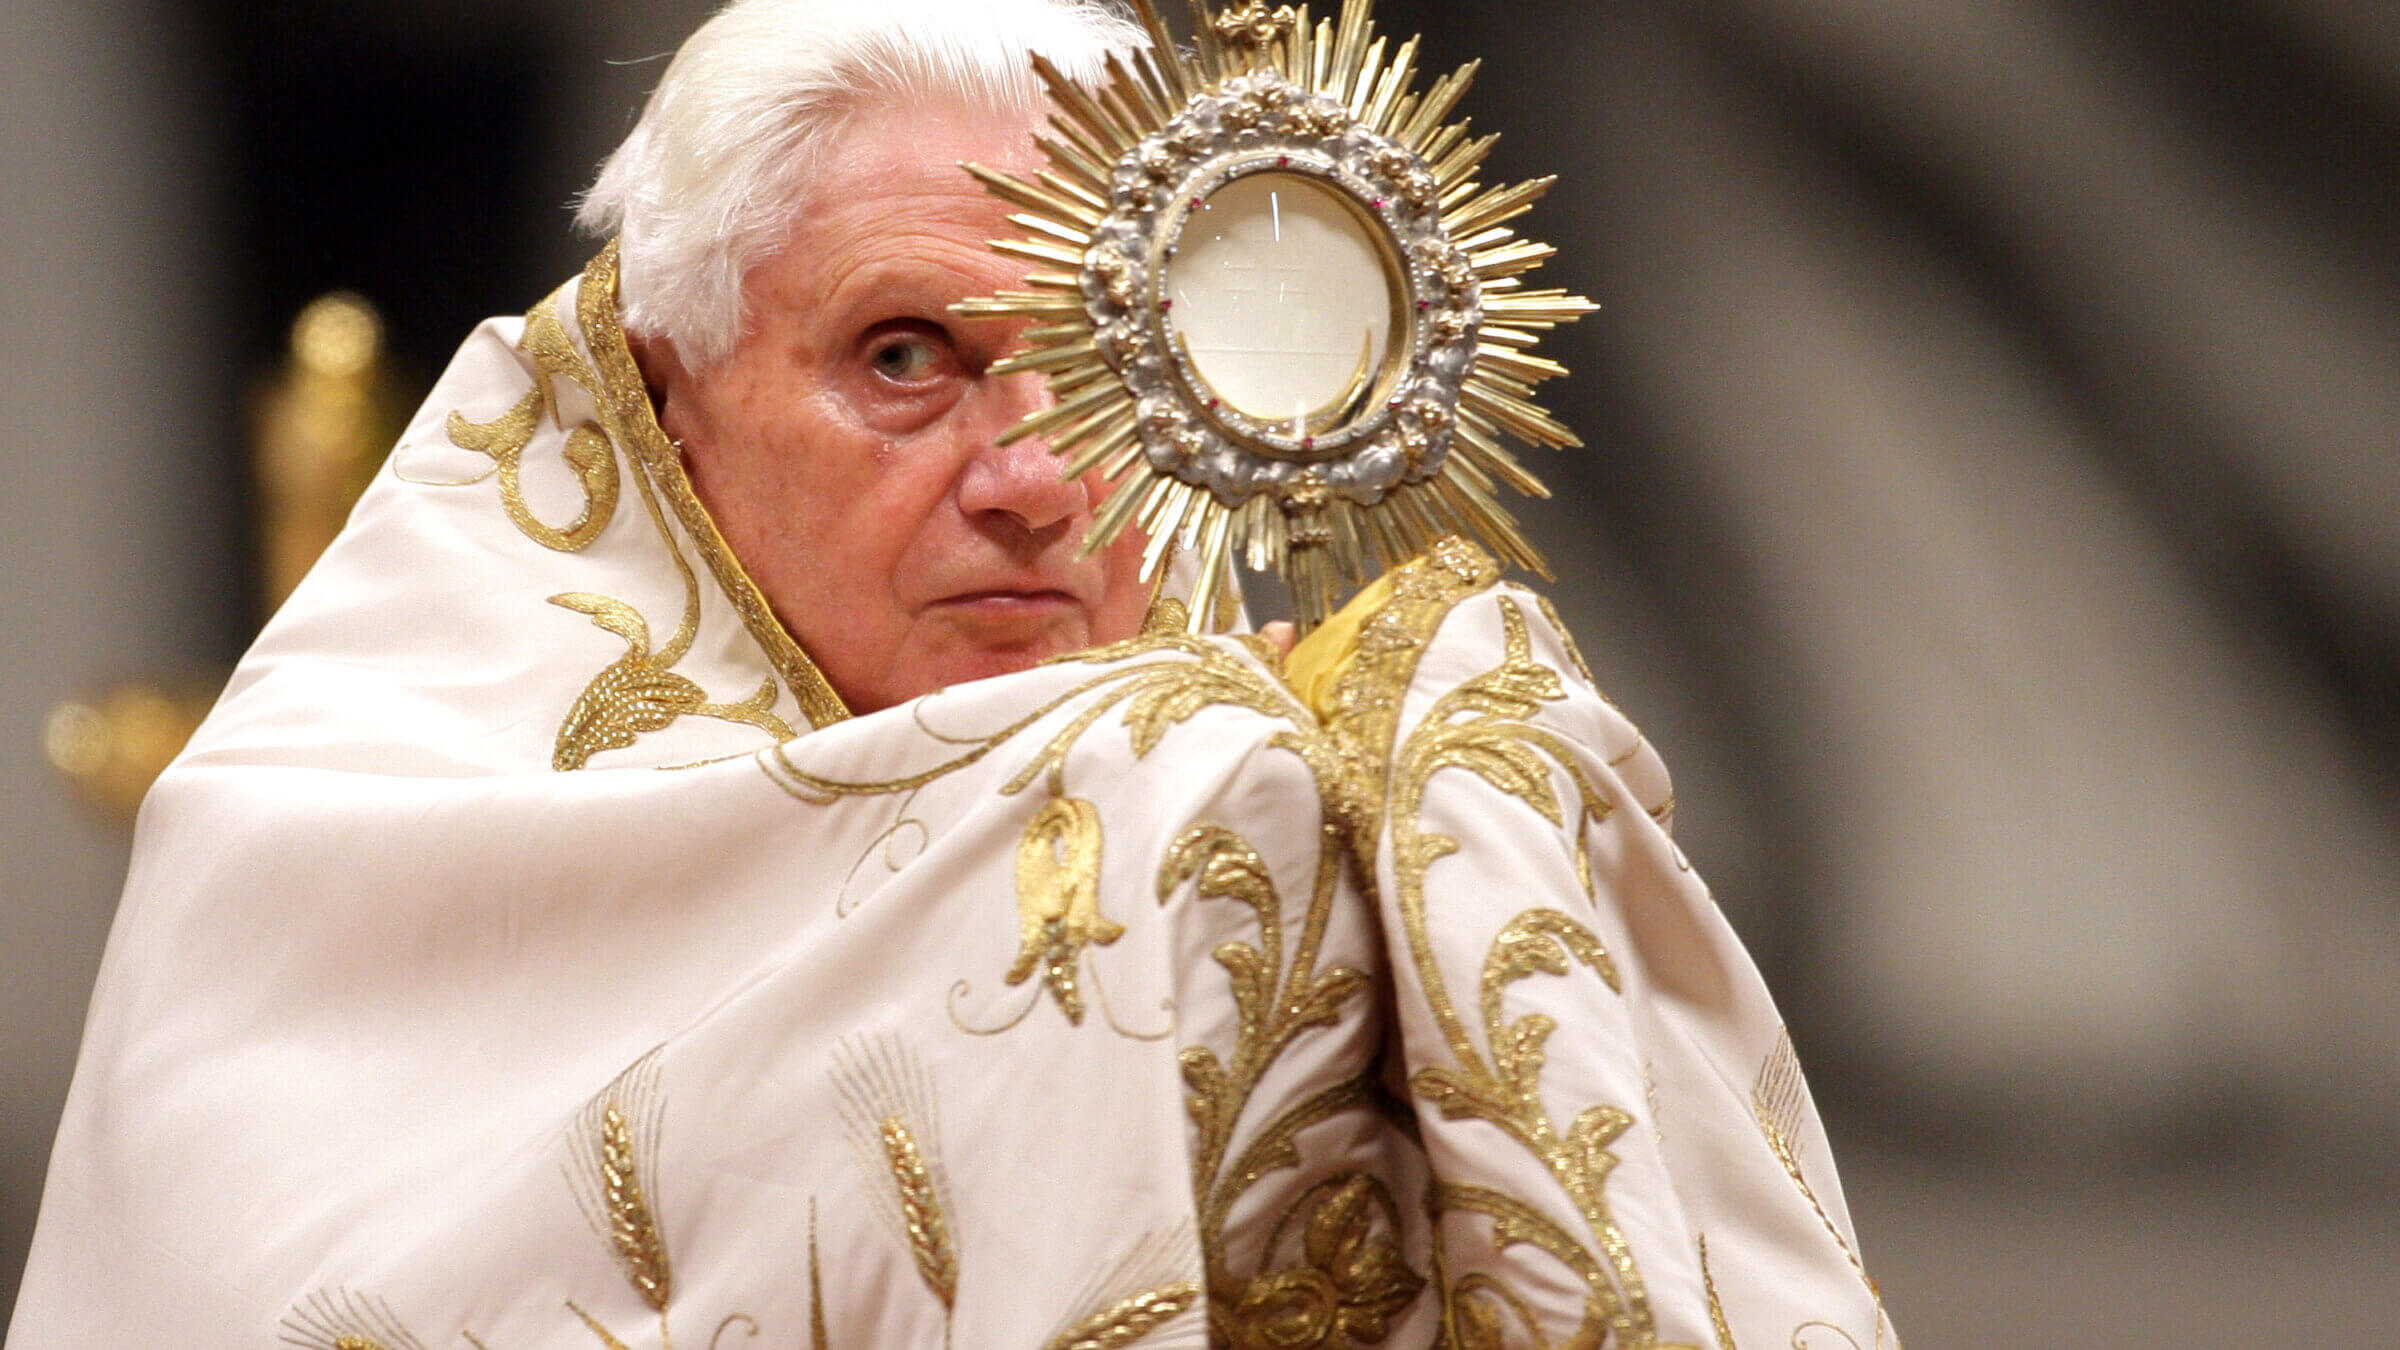  Pope Benedict XVI leads the First Vespers and Te Deum prayers at St. Peter's Basilica on December 31, 2009 in Vatican City.